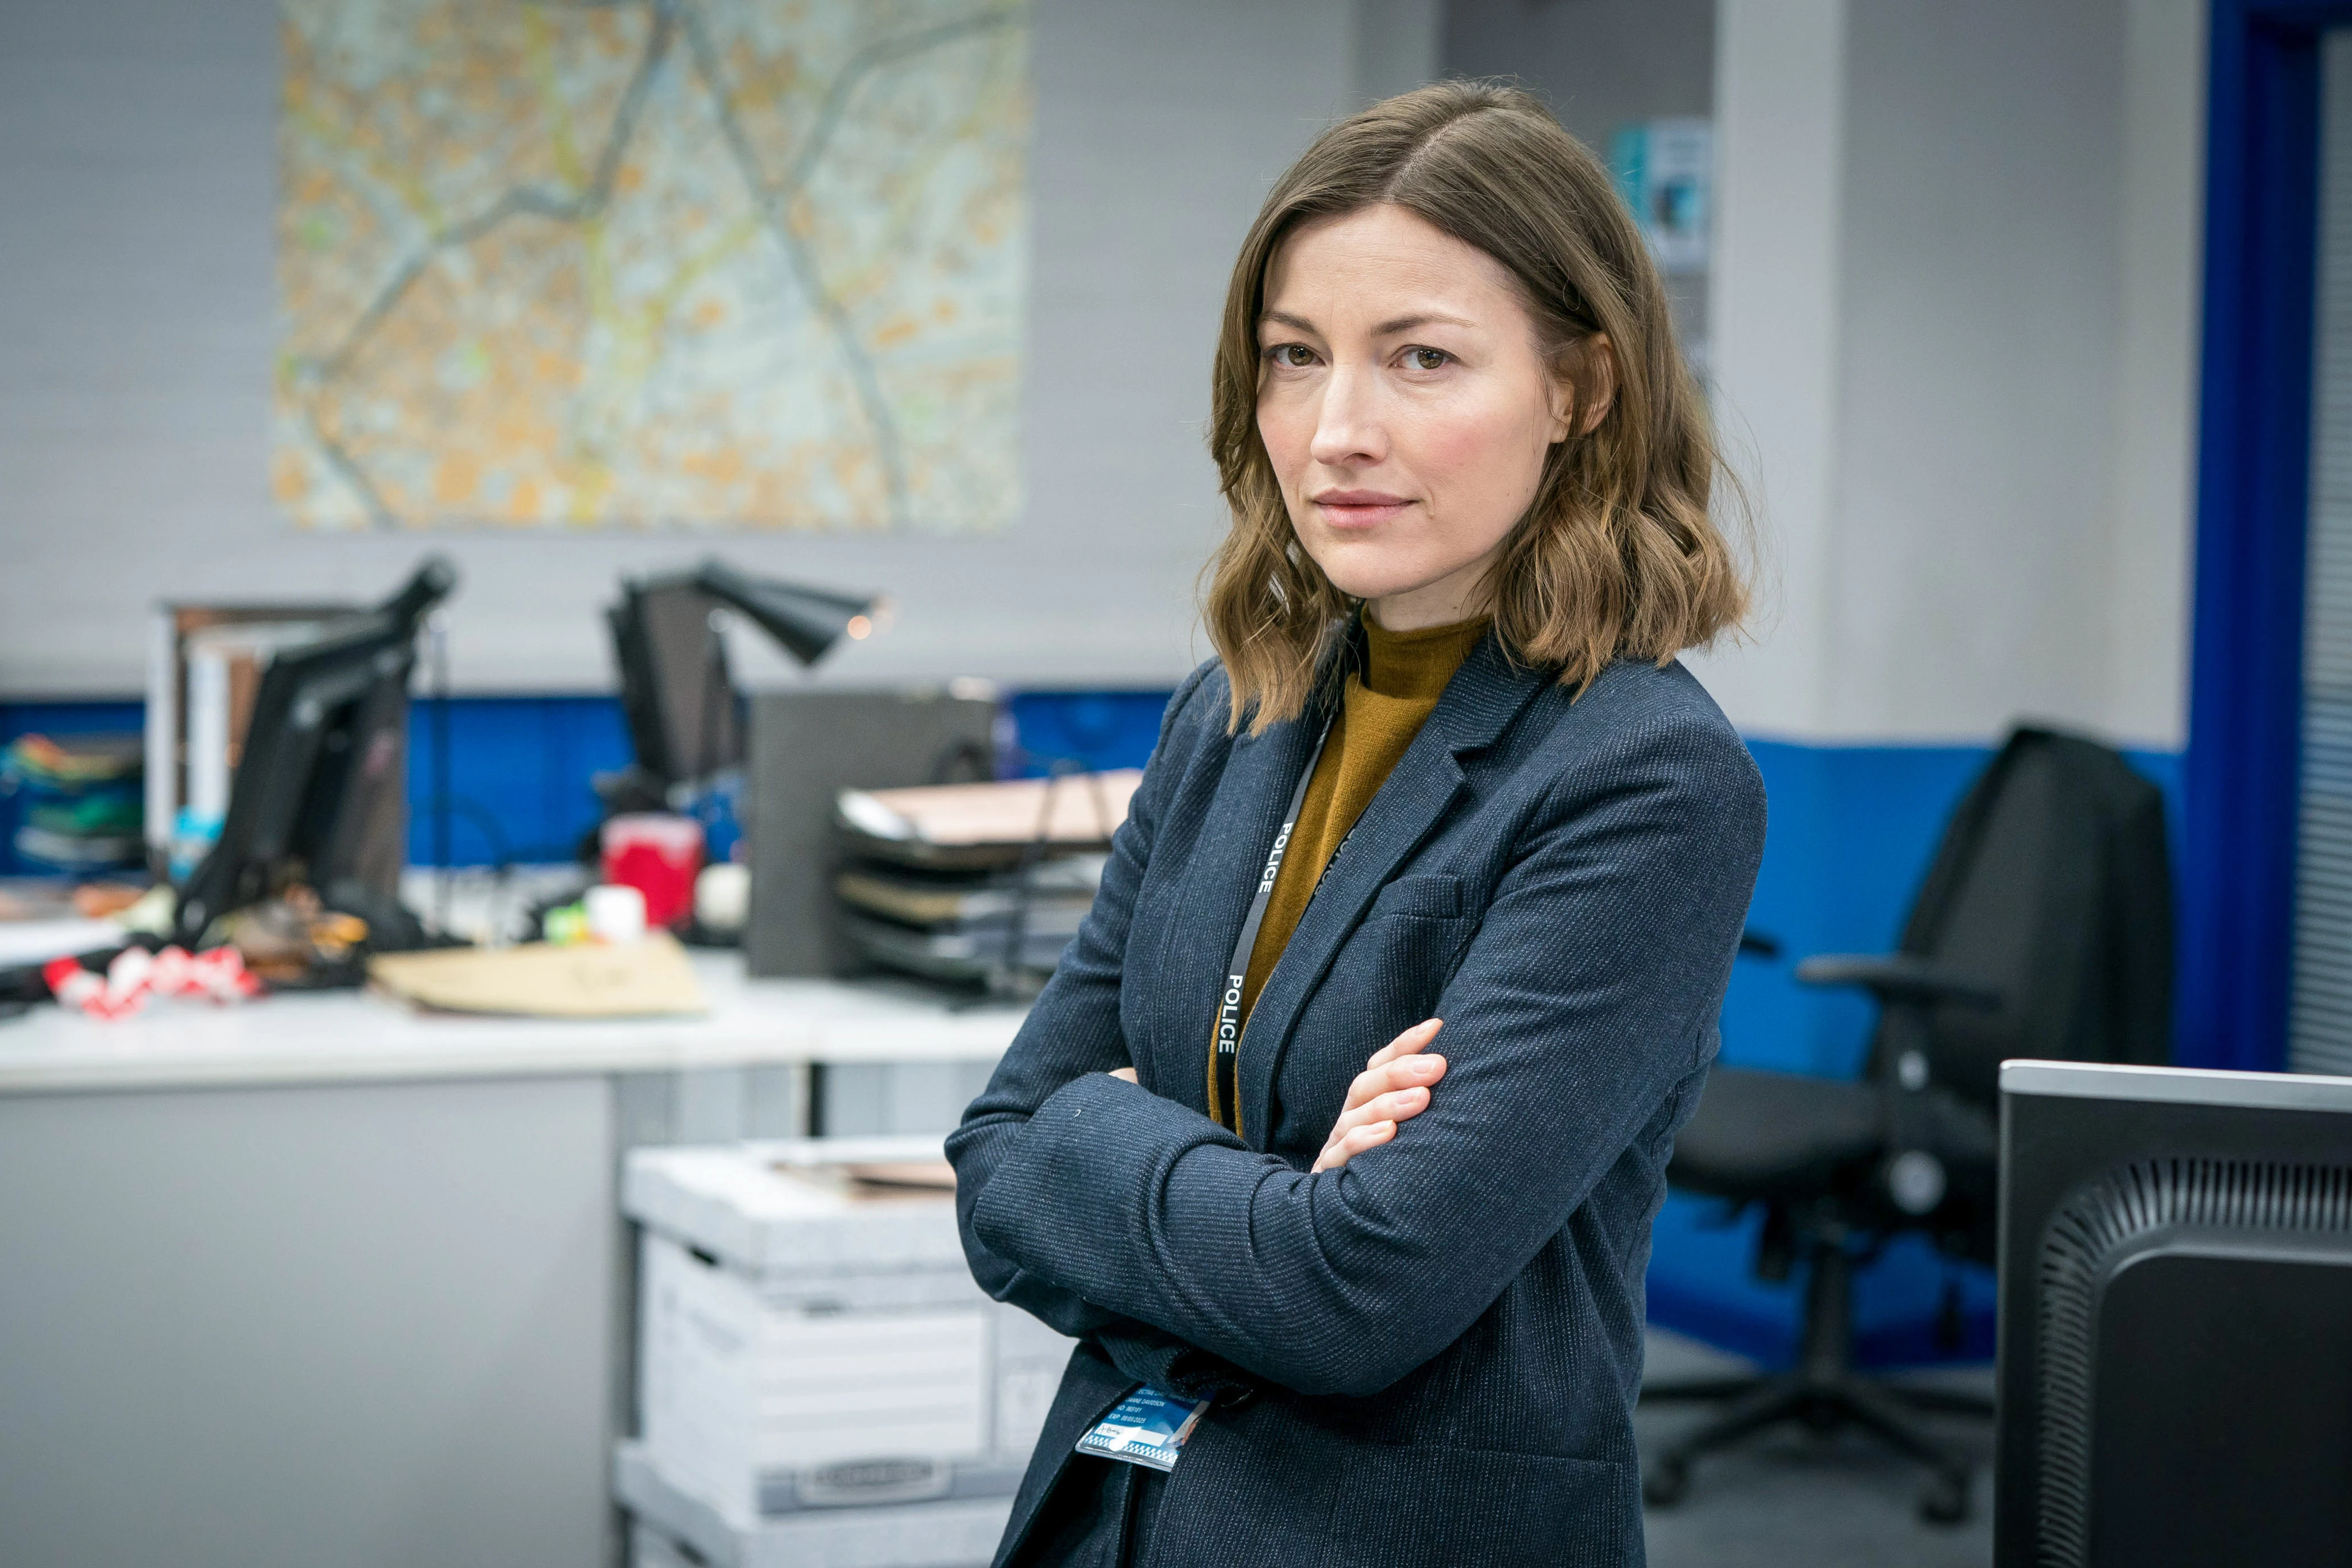 What Nationality Is Kelly Macdonald? Is Kelly Macdonald Really Scottish? Where Is Kelly Macdonald From? Where Did Kelly Macdonald Grow Up?